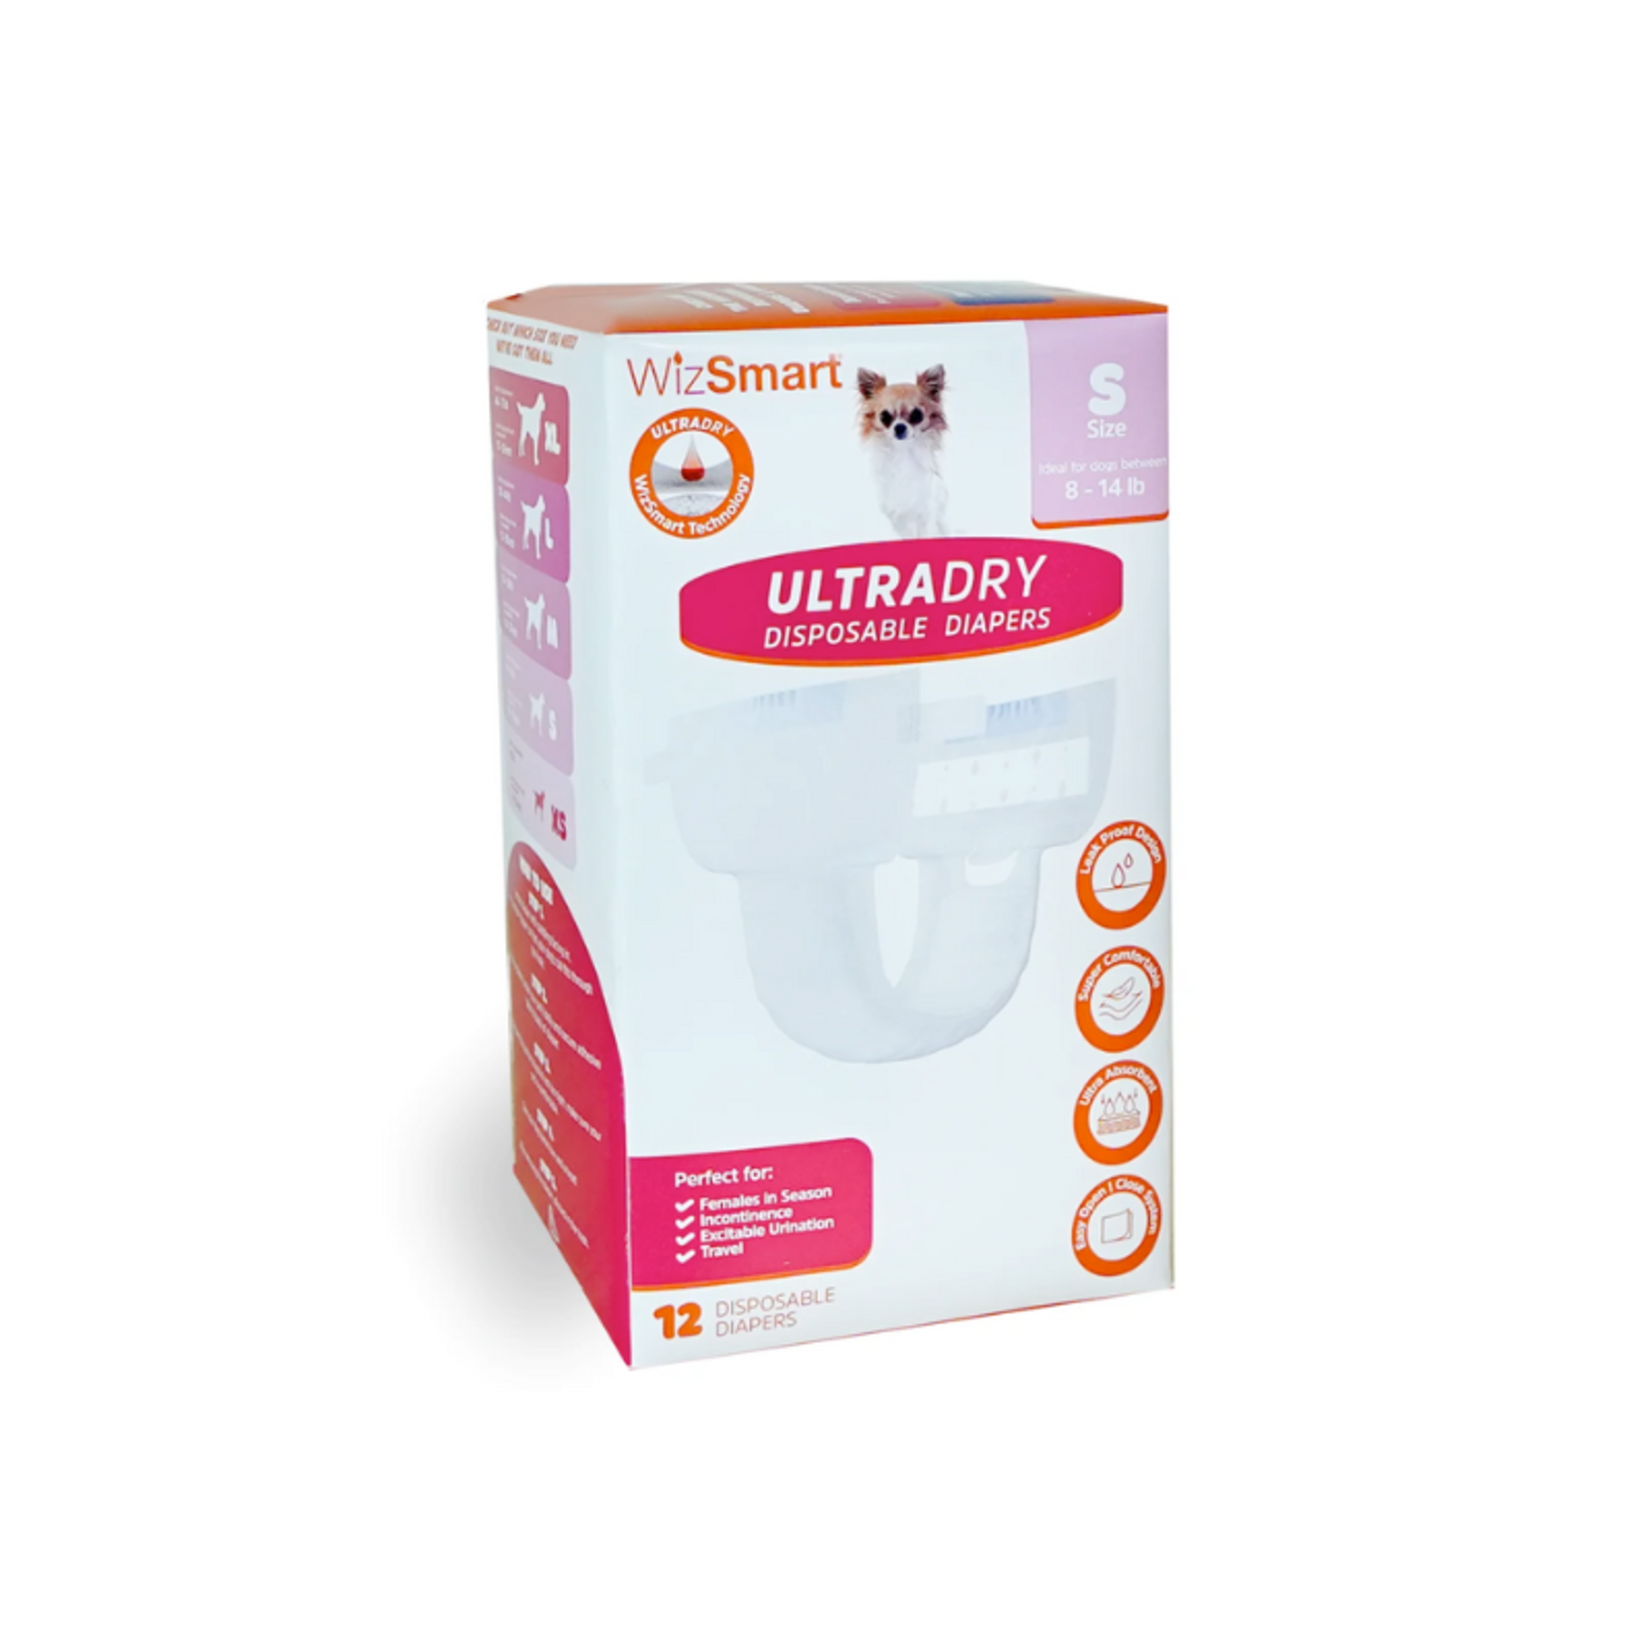 12 pack - UltraDry Disposable Dog Diapers - WizSmart